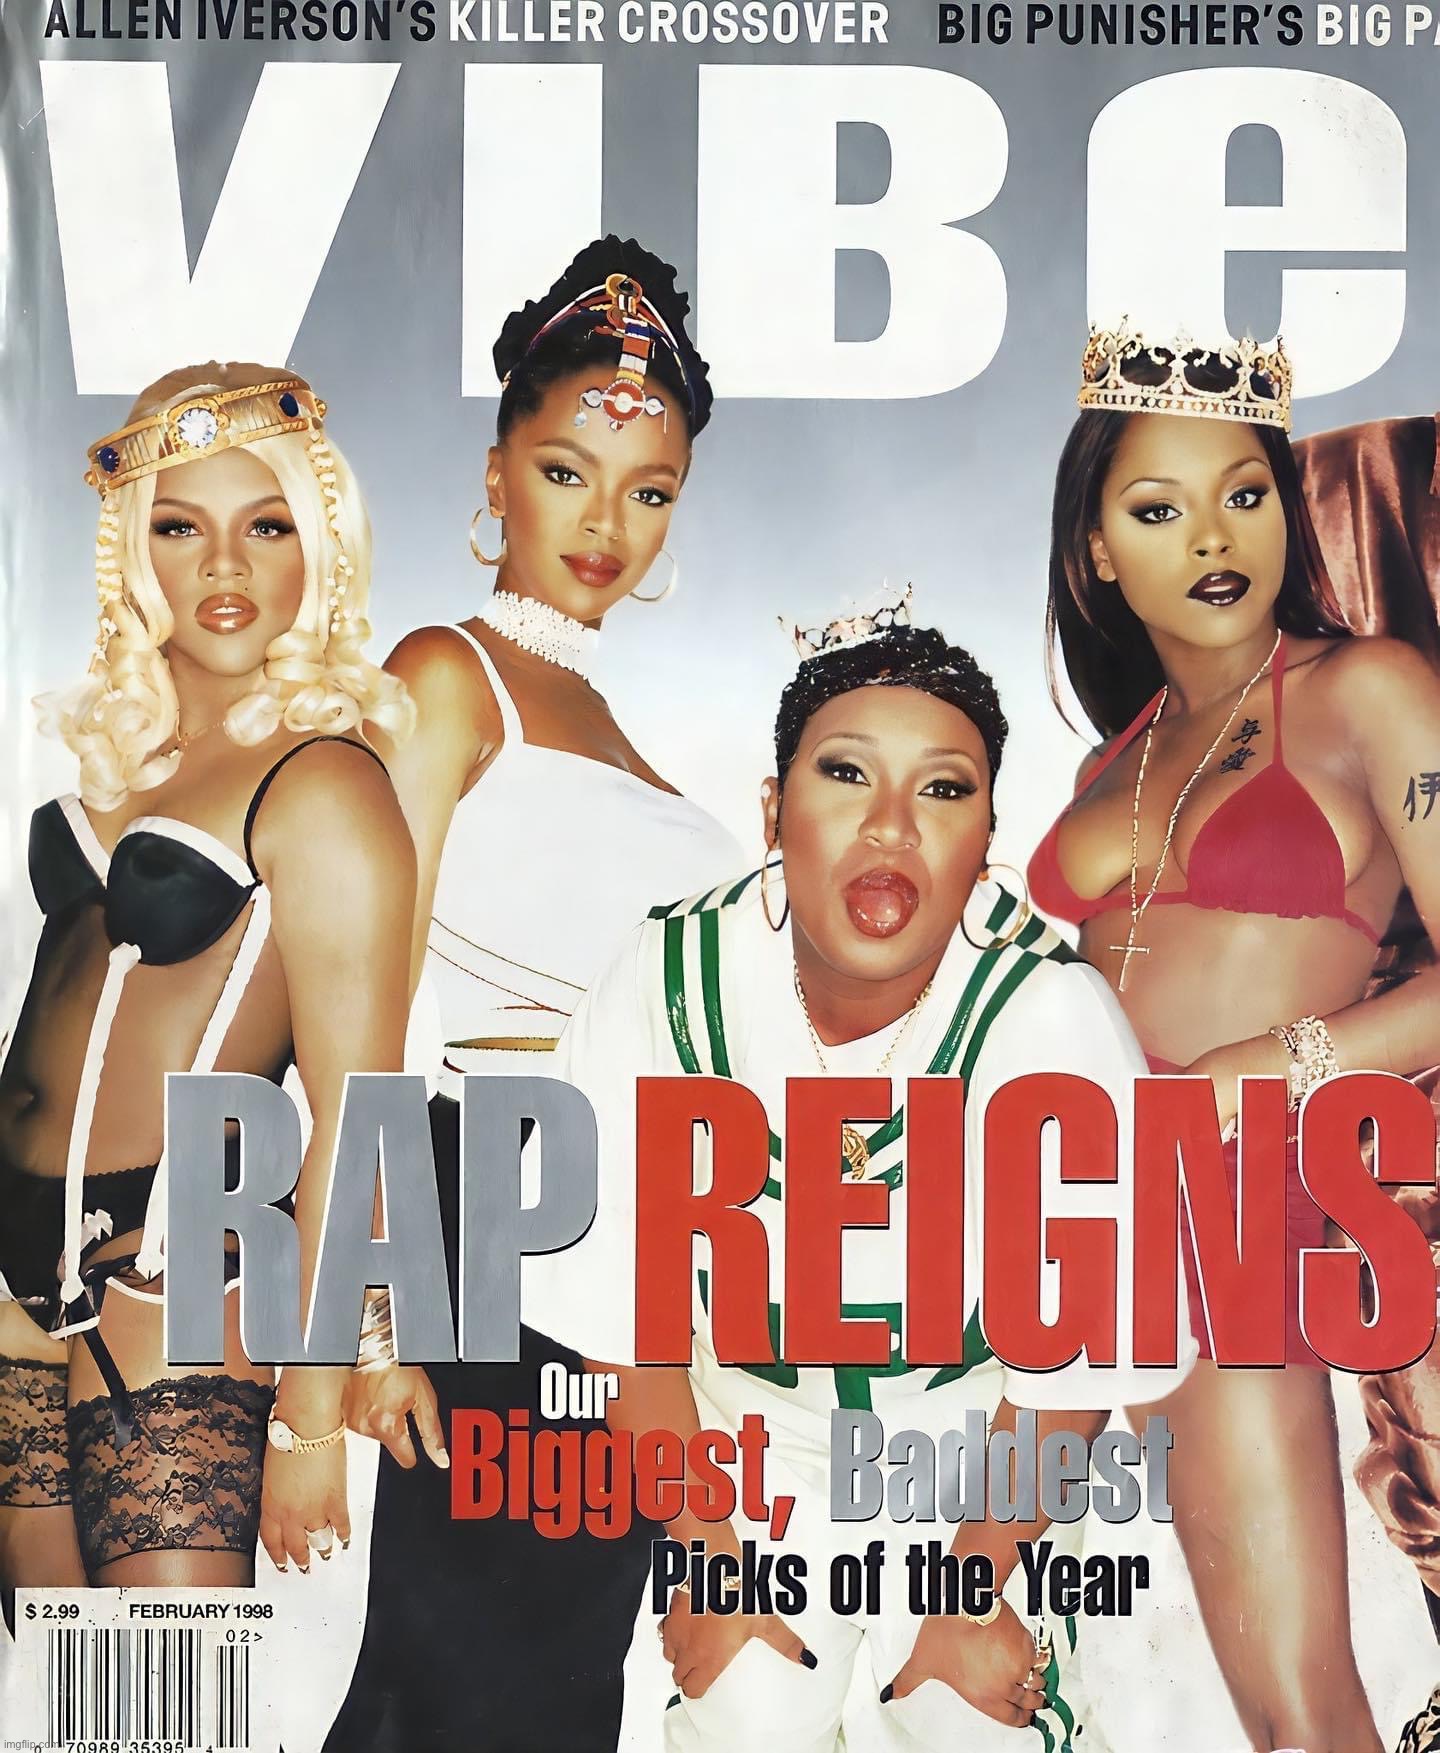 Classic VIBE cover from 1998 | image tagged in classic vibe cover from 1998 | made w/ Imgflip meme maker